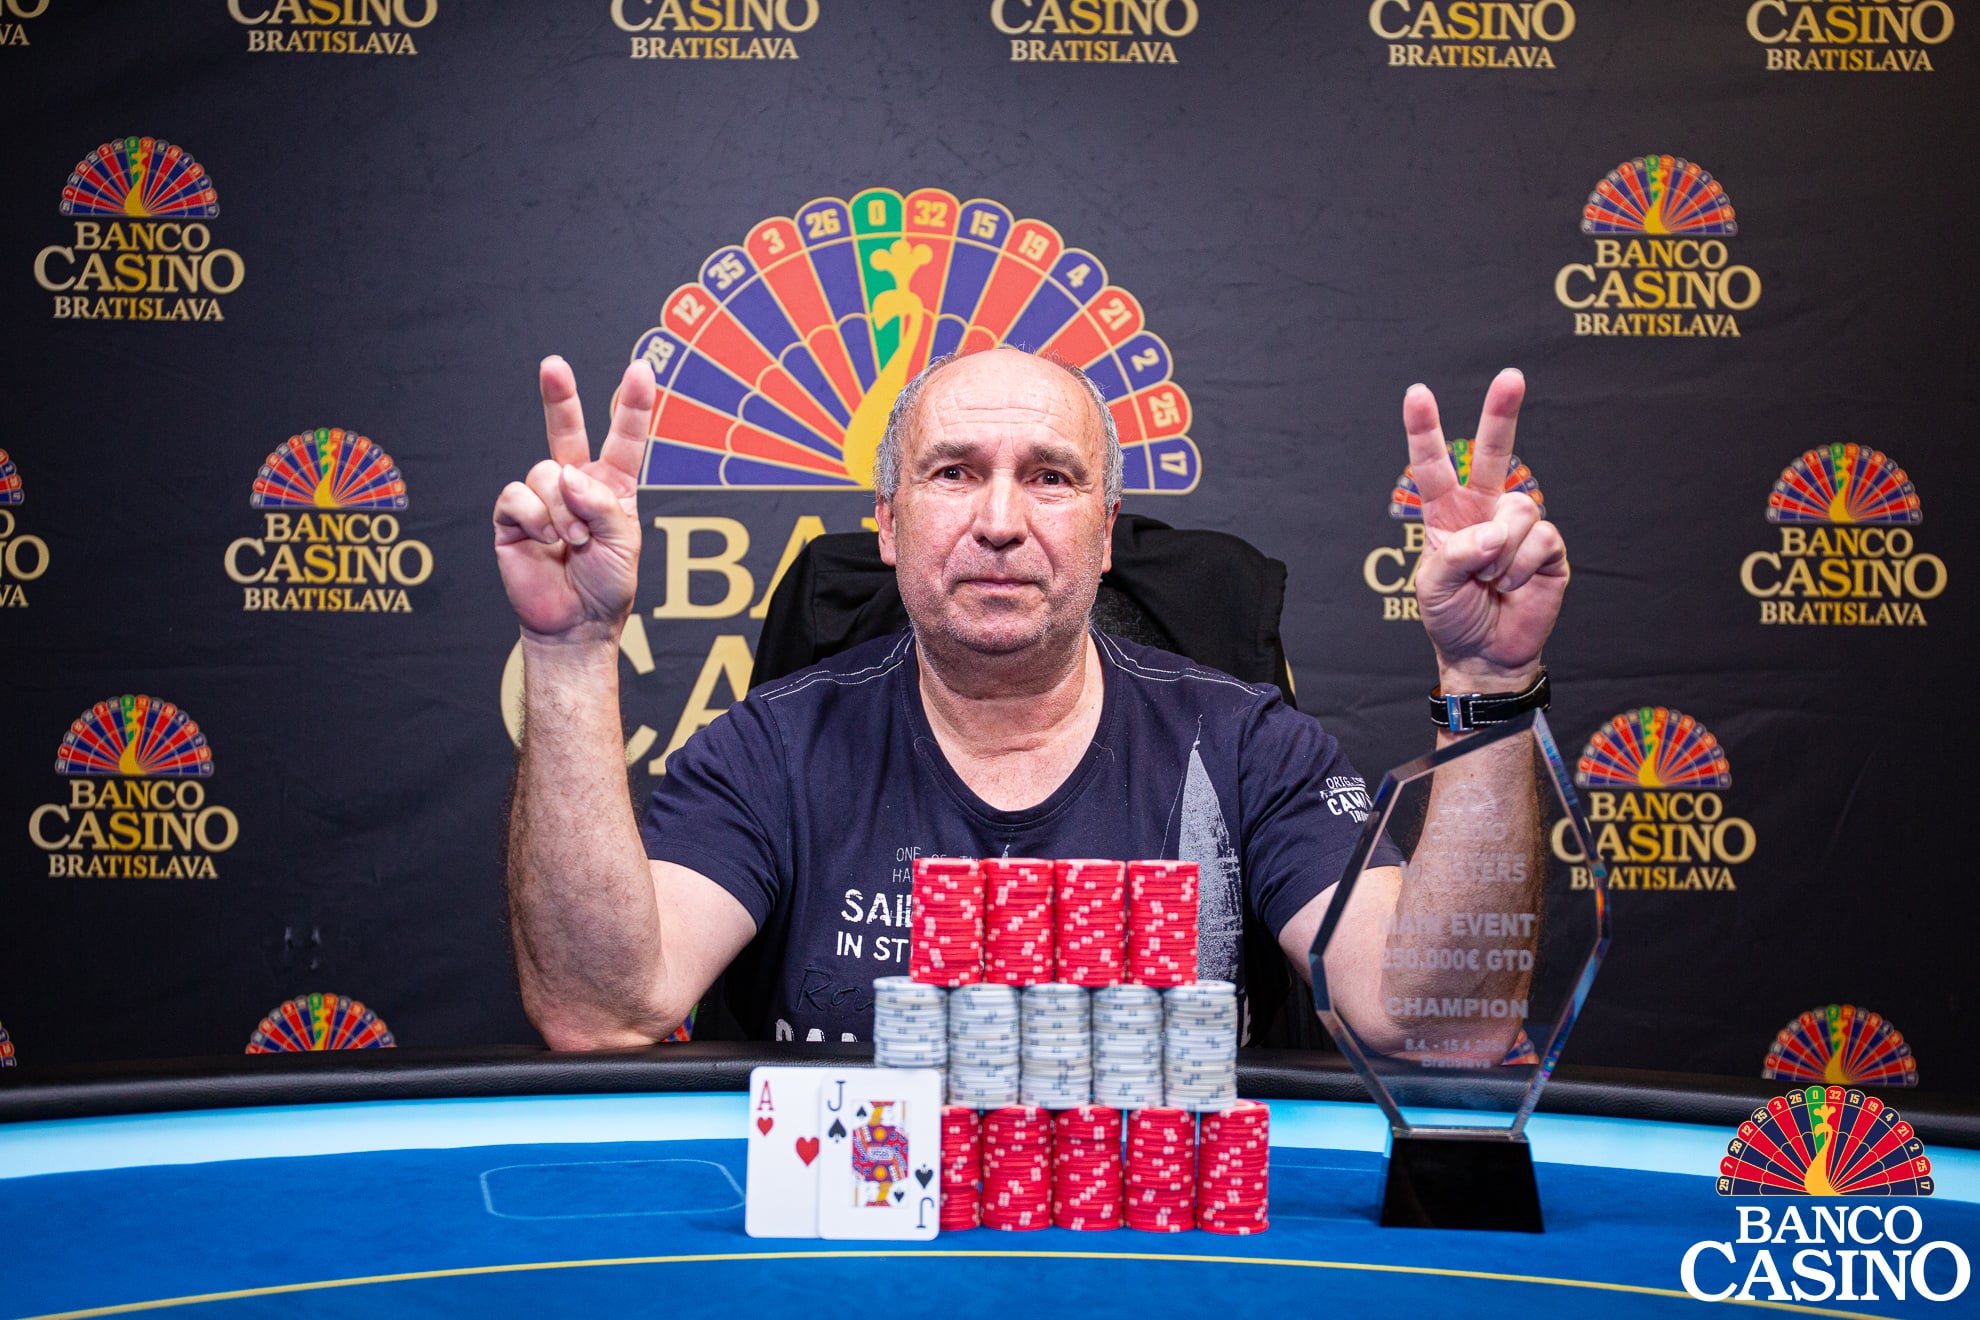 Christian Sykora becomes the champion of Banco Casino Masters #38 and takes home 36,370€!